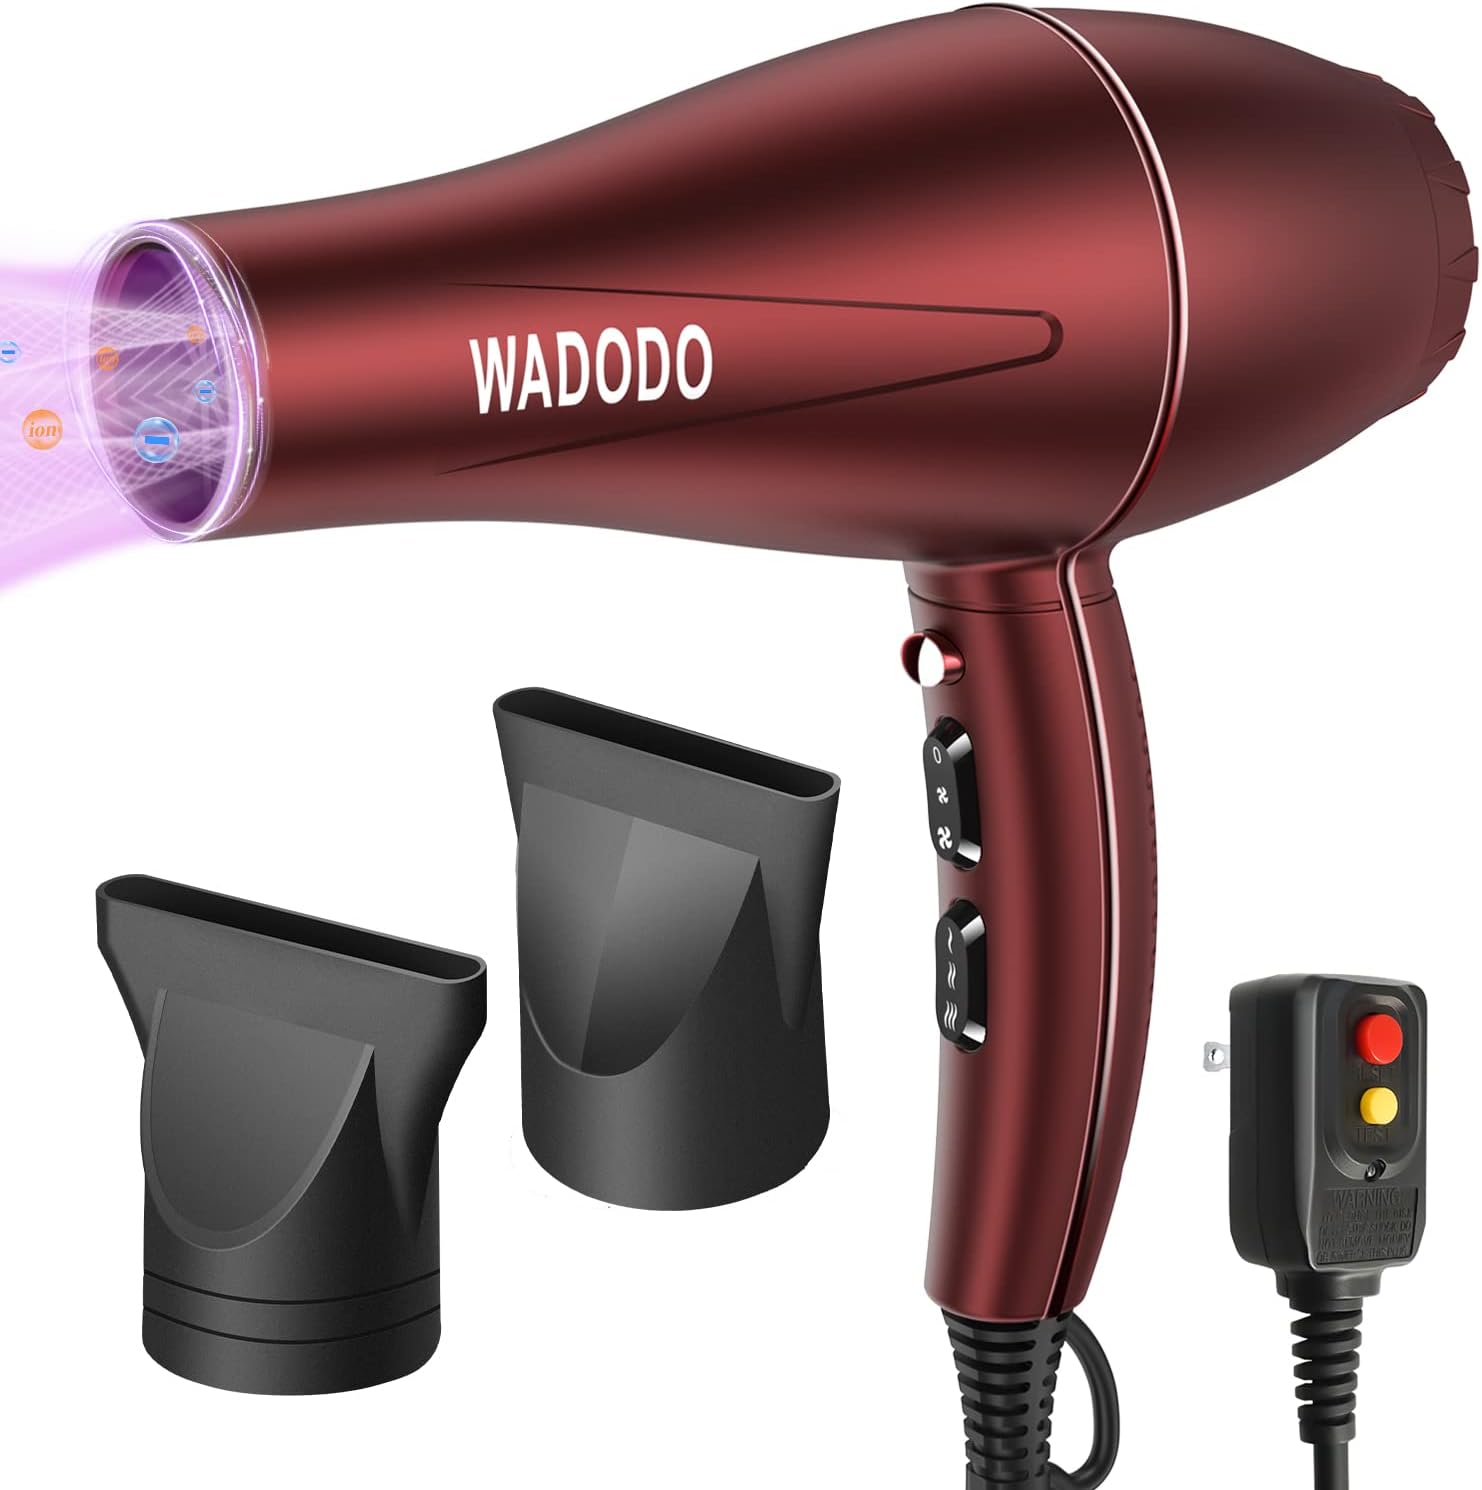 Ionic Hair Dryer, 2200W Professional Blow Dryer Fast Drying Travel Hair Dryer, AC Motor Constant Temperature Low Noise Ion Hair Dryers Curly Hair Care Hairdryer Blowdryer for Women Men(Red)